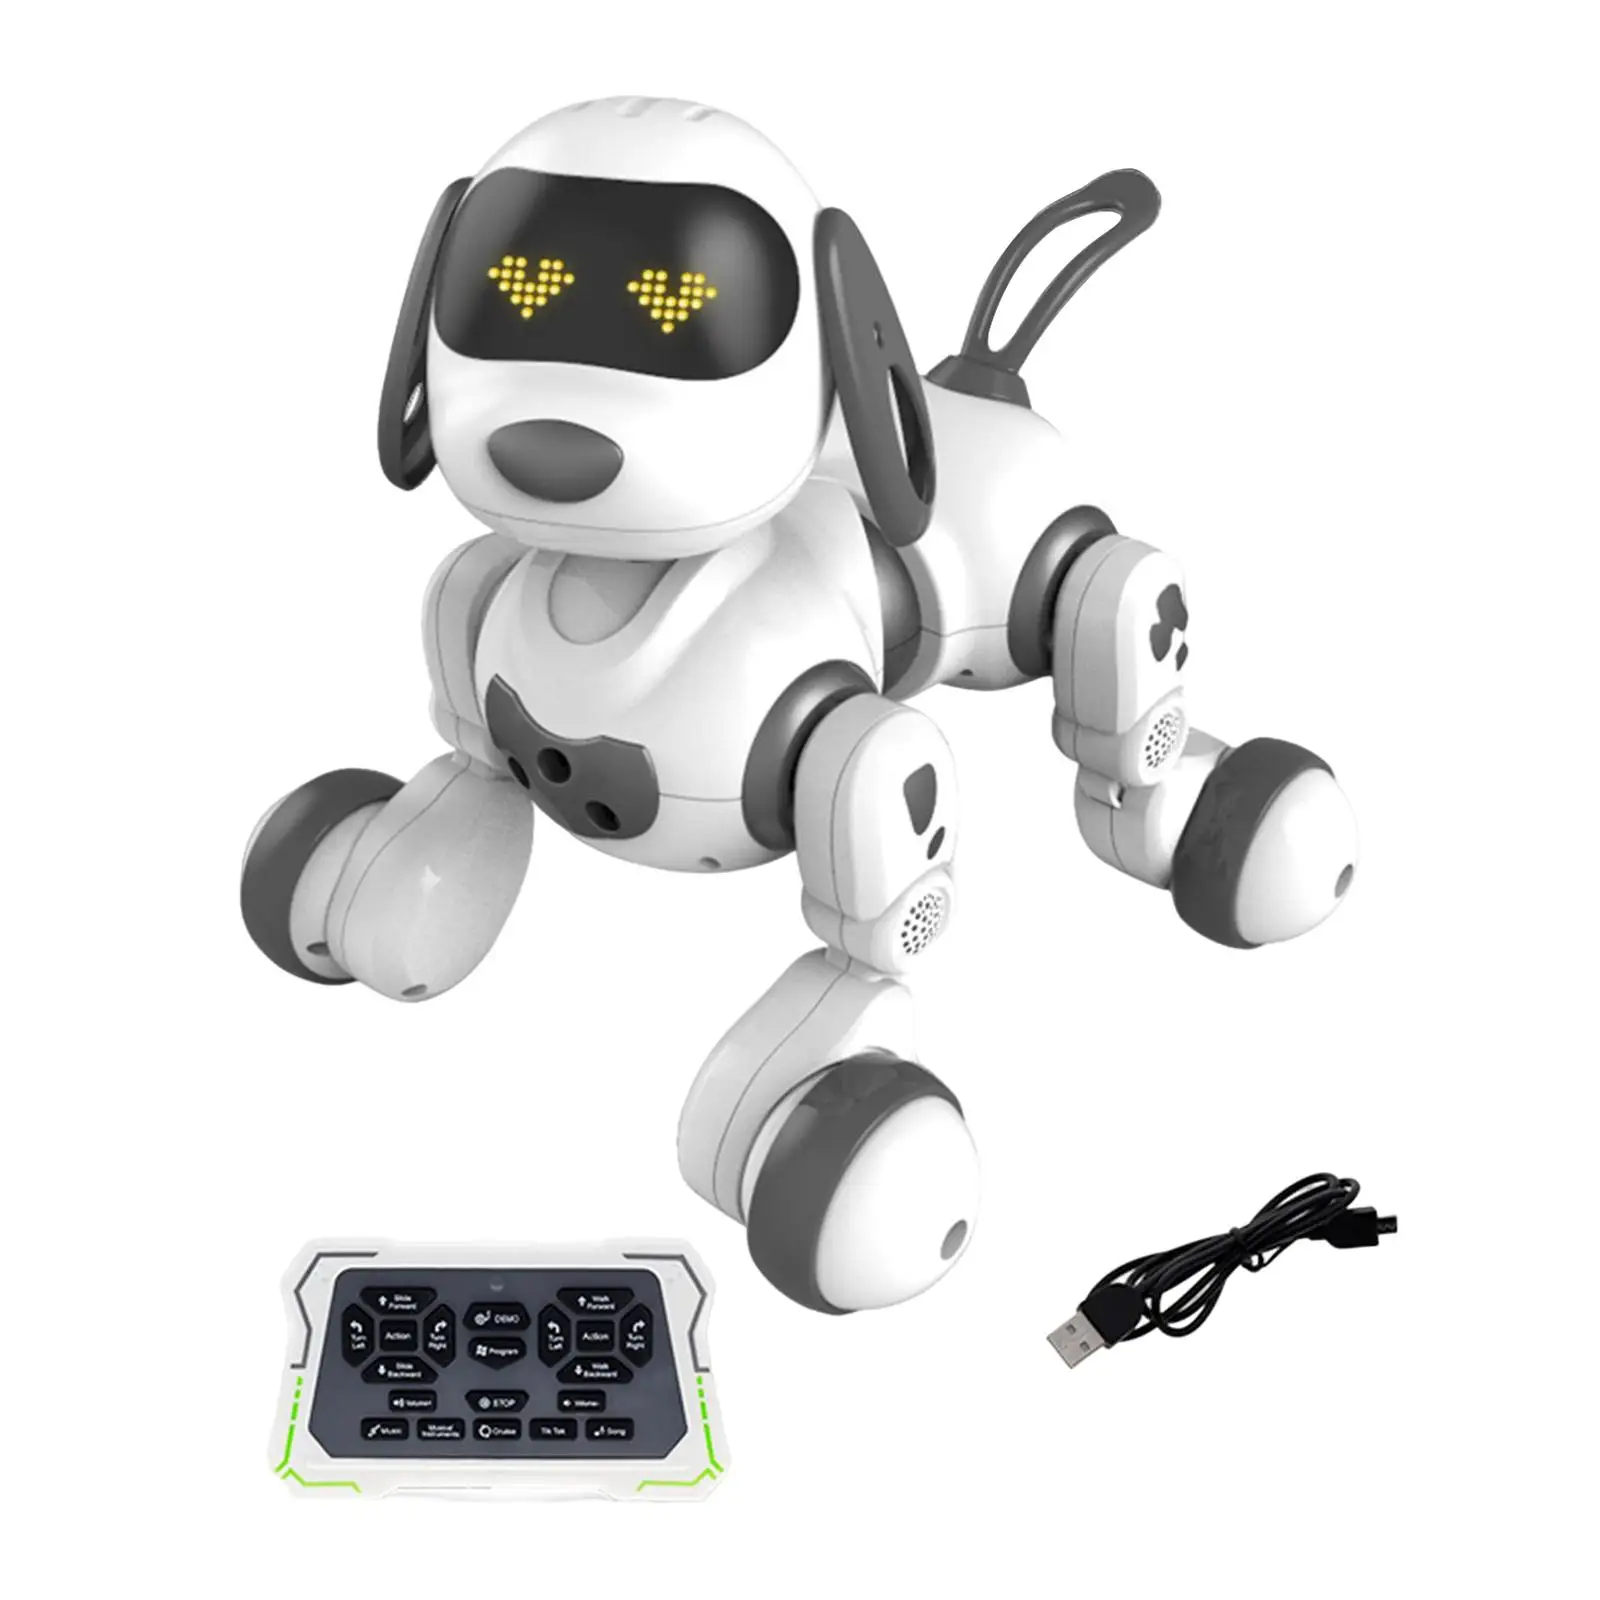 Remote Control Robot Dog Toy Music Song Robot Dog for Toddlers Baby Children